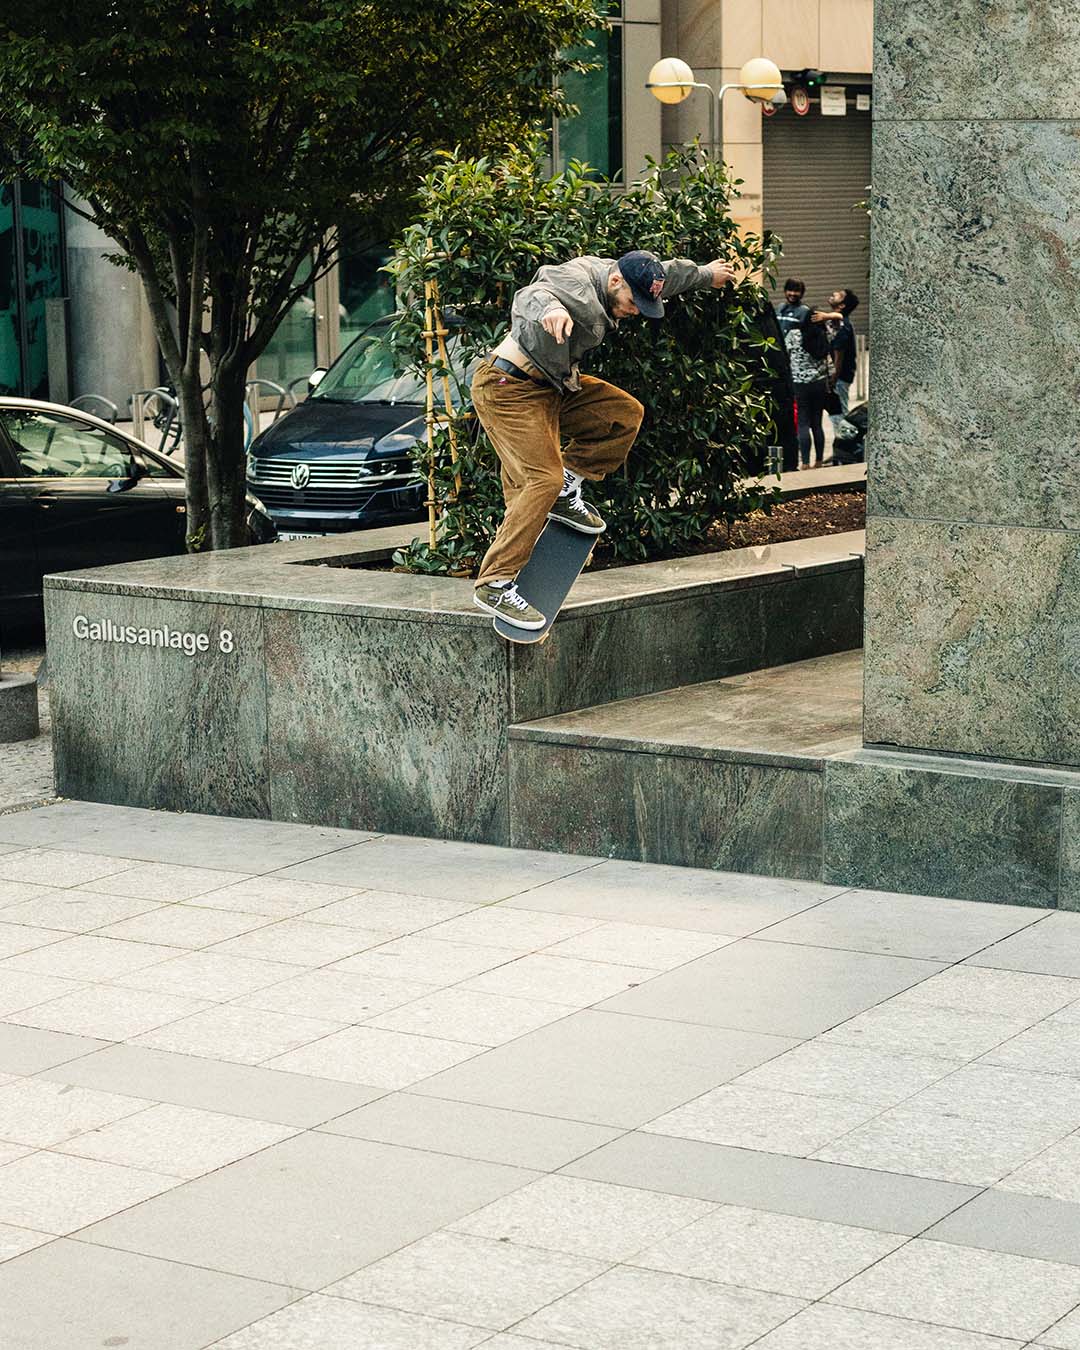 Still photography of skateboarder Lutz Schreier performing a Nosegrind on a marble low to high ledge in Frankfurt, Germany.